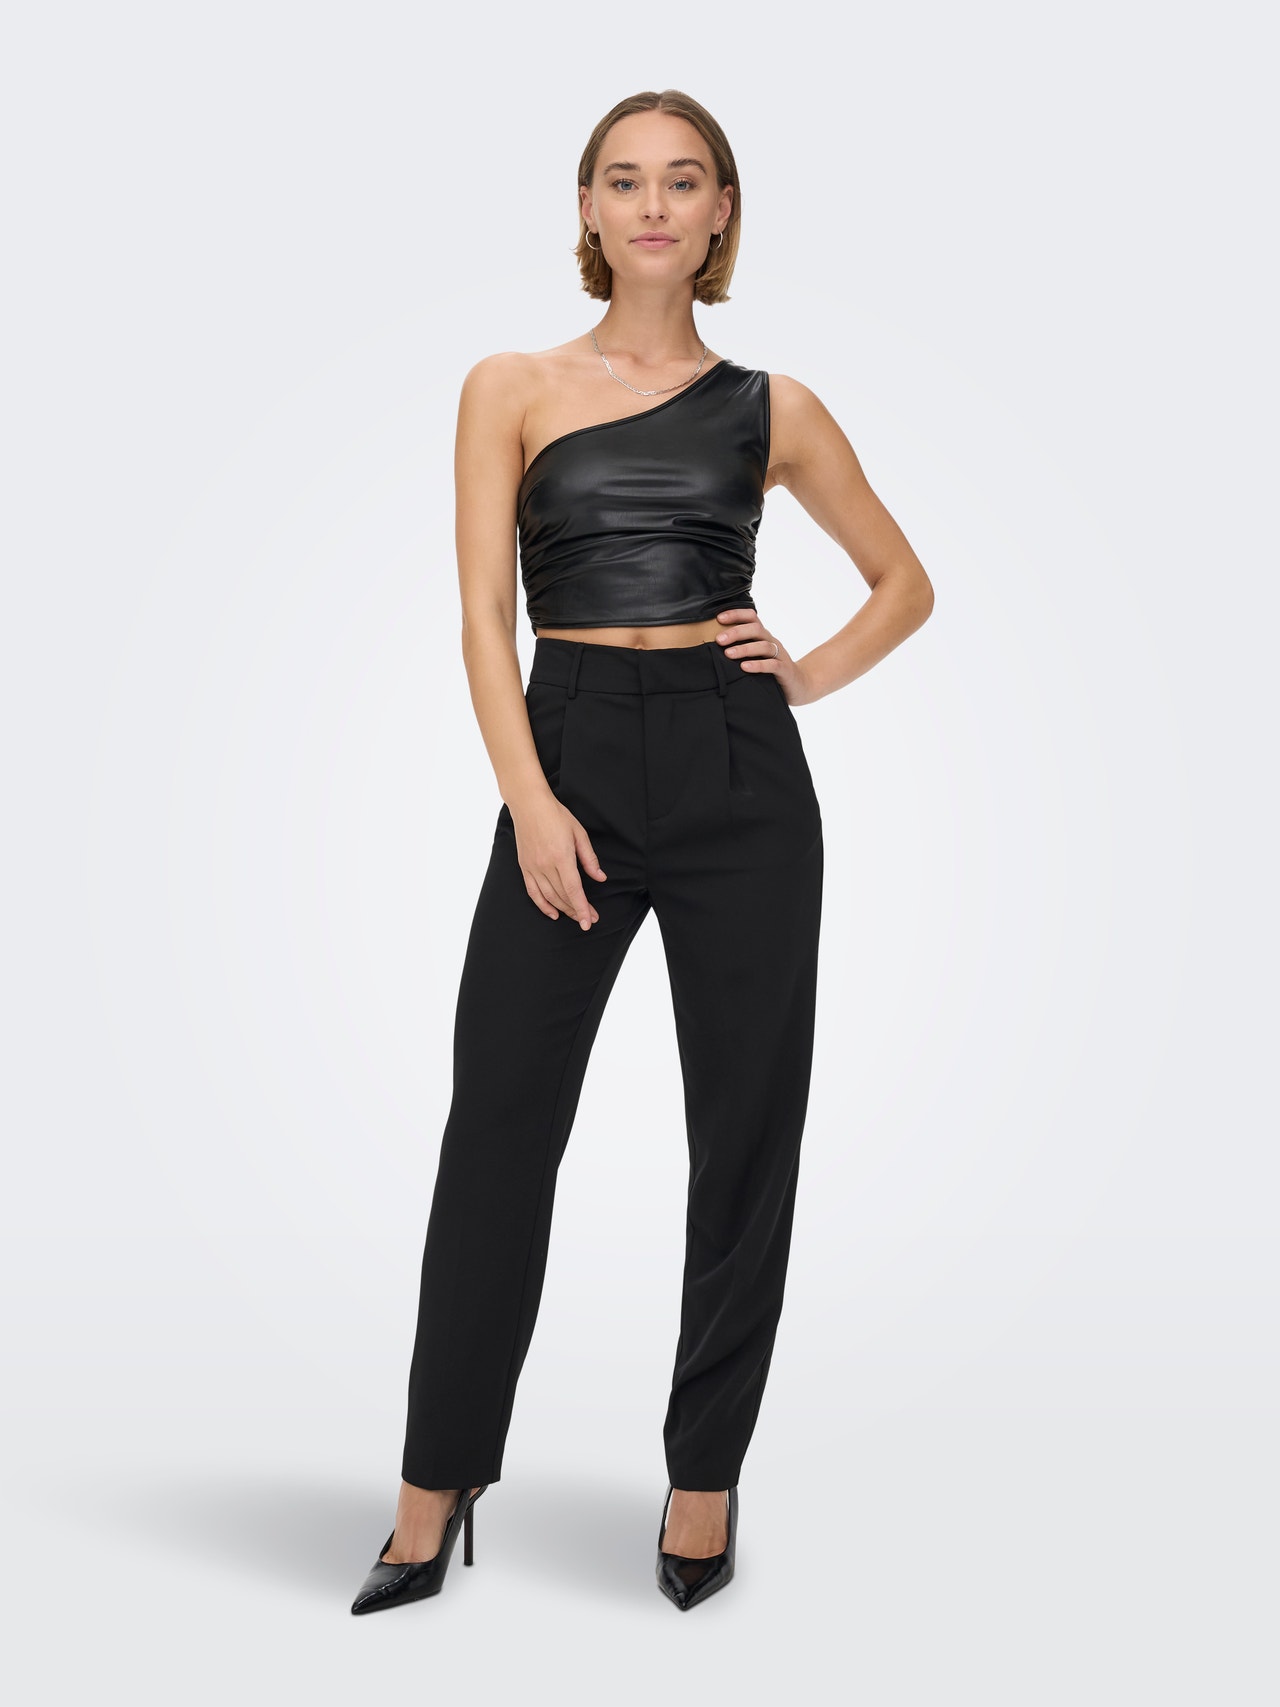 Cropped Fit One Shoulder Top with 30% discount!